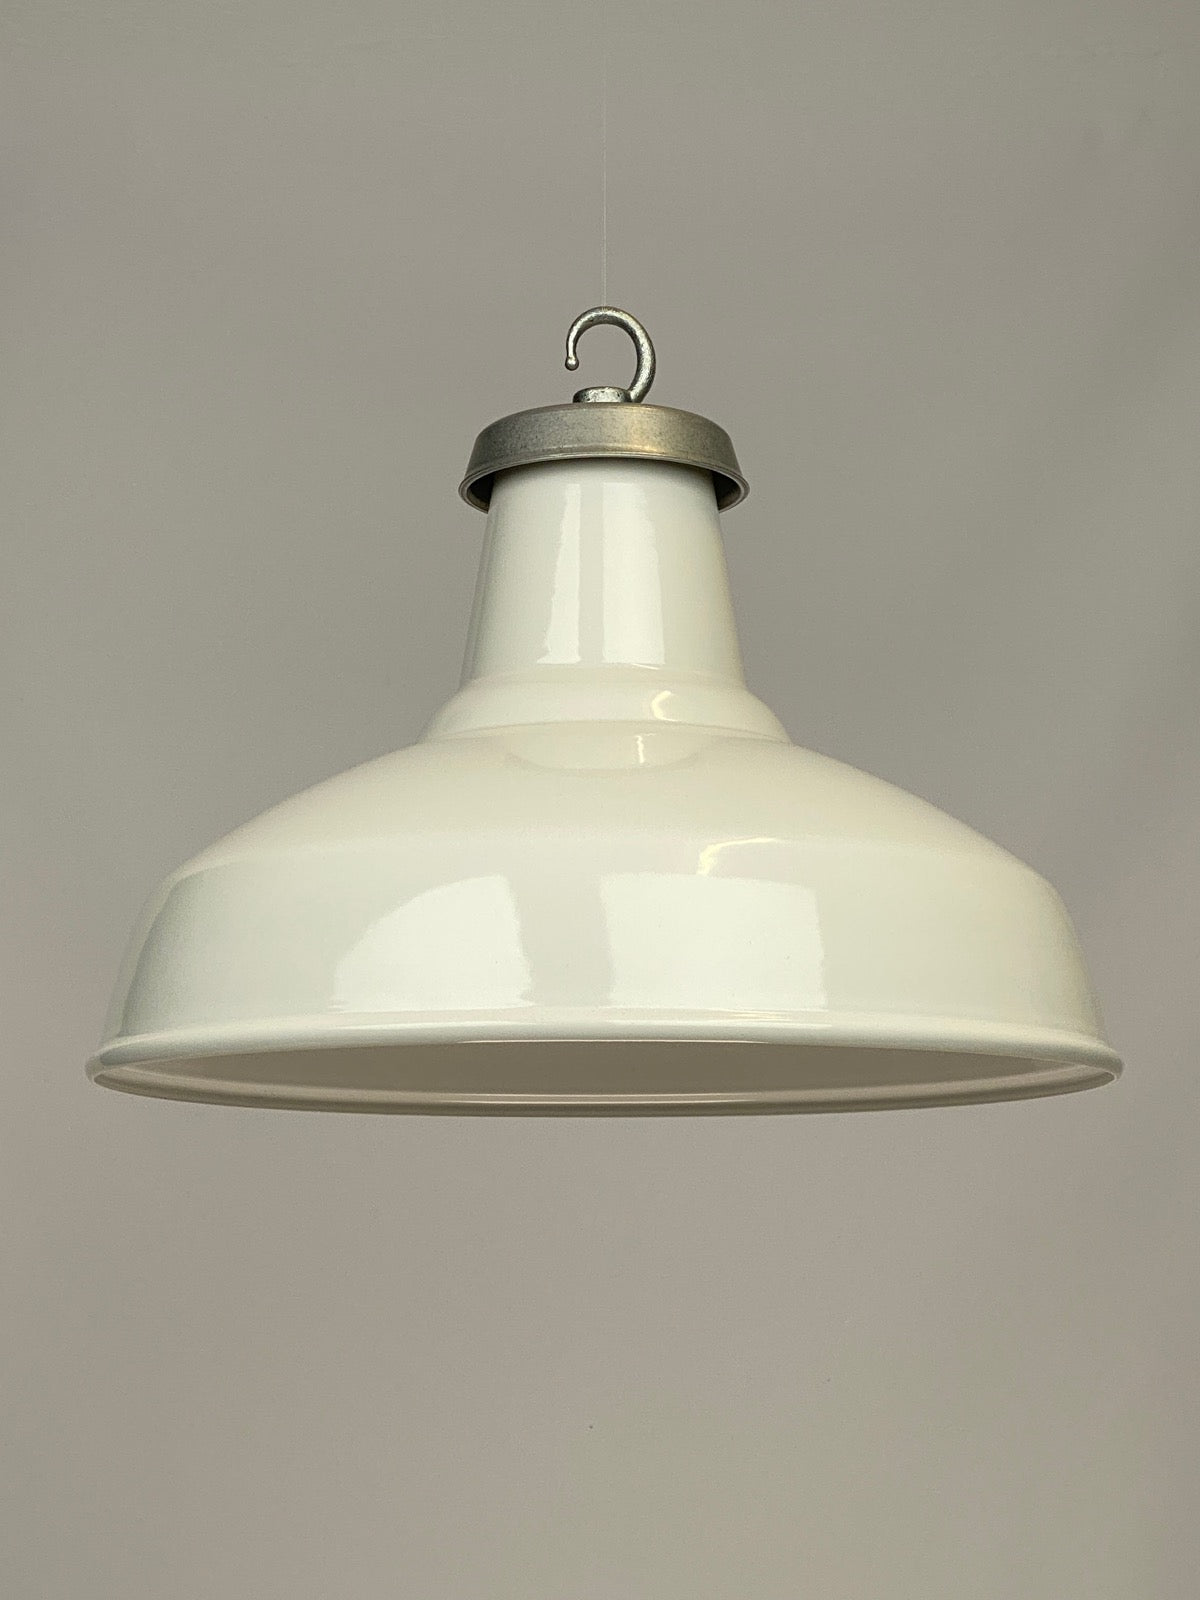 An example of a white enamel 36cm diameter Reflector Shade from our Worn Lighting collection.